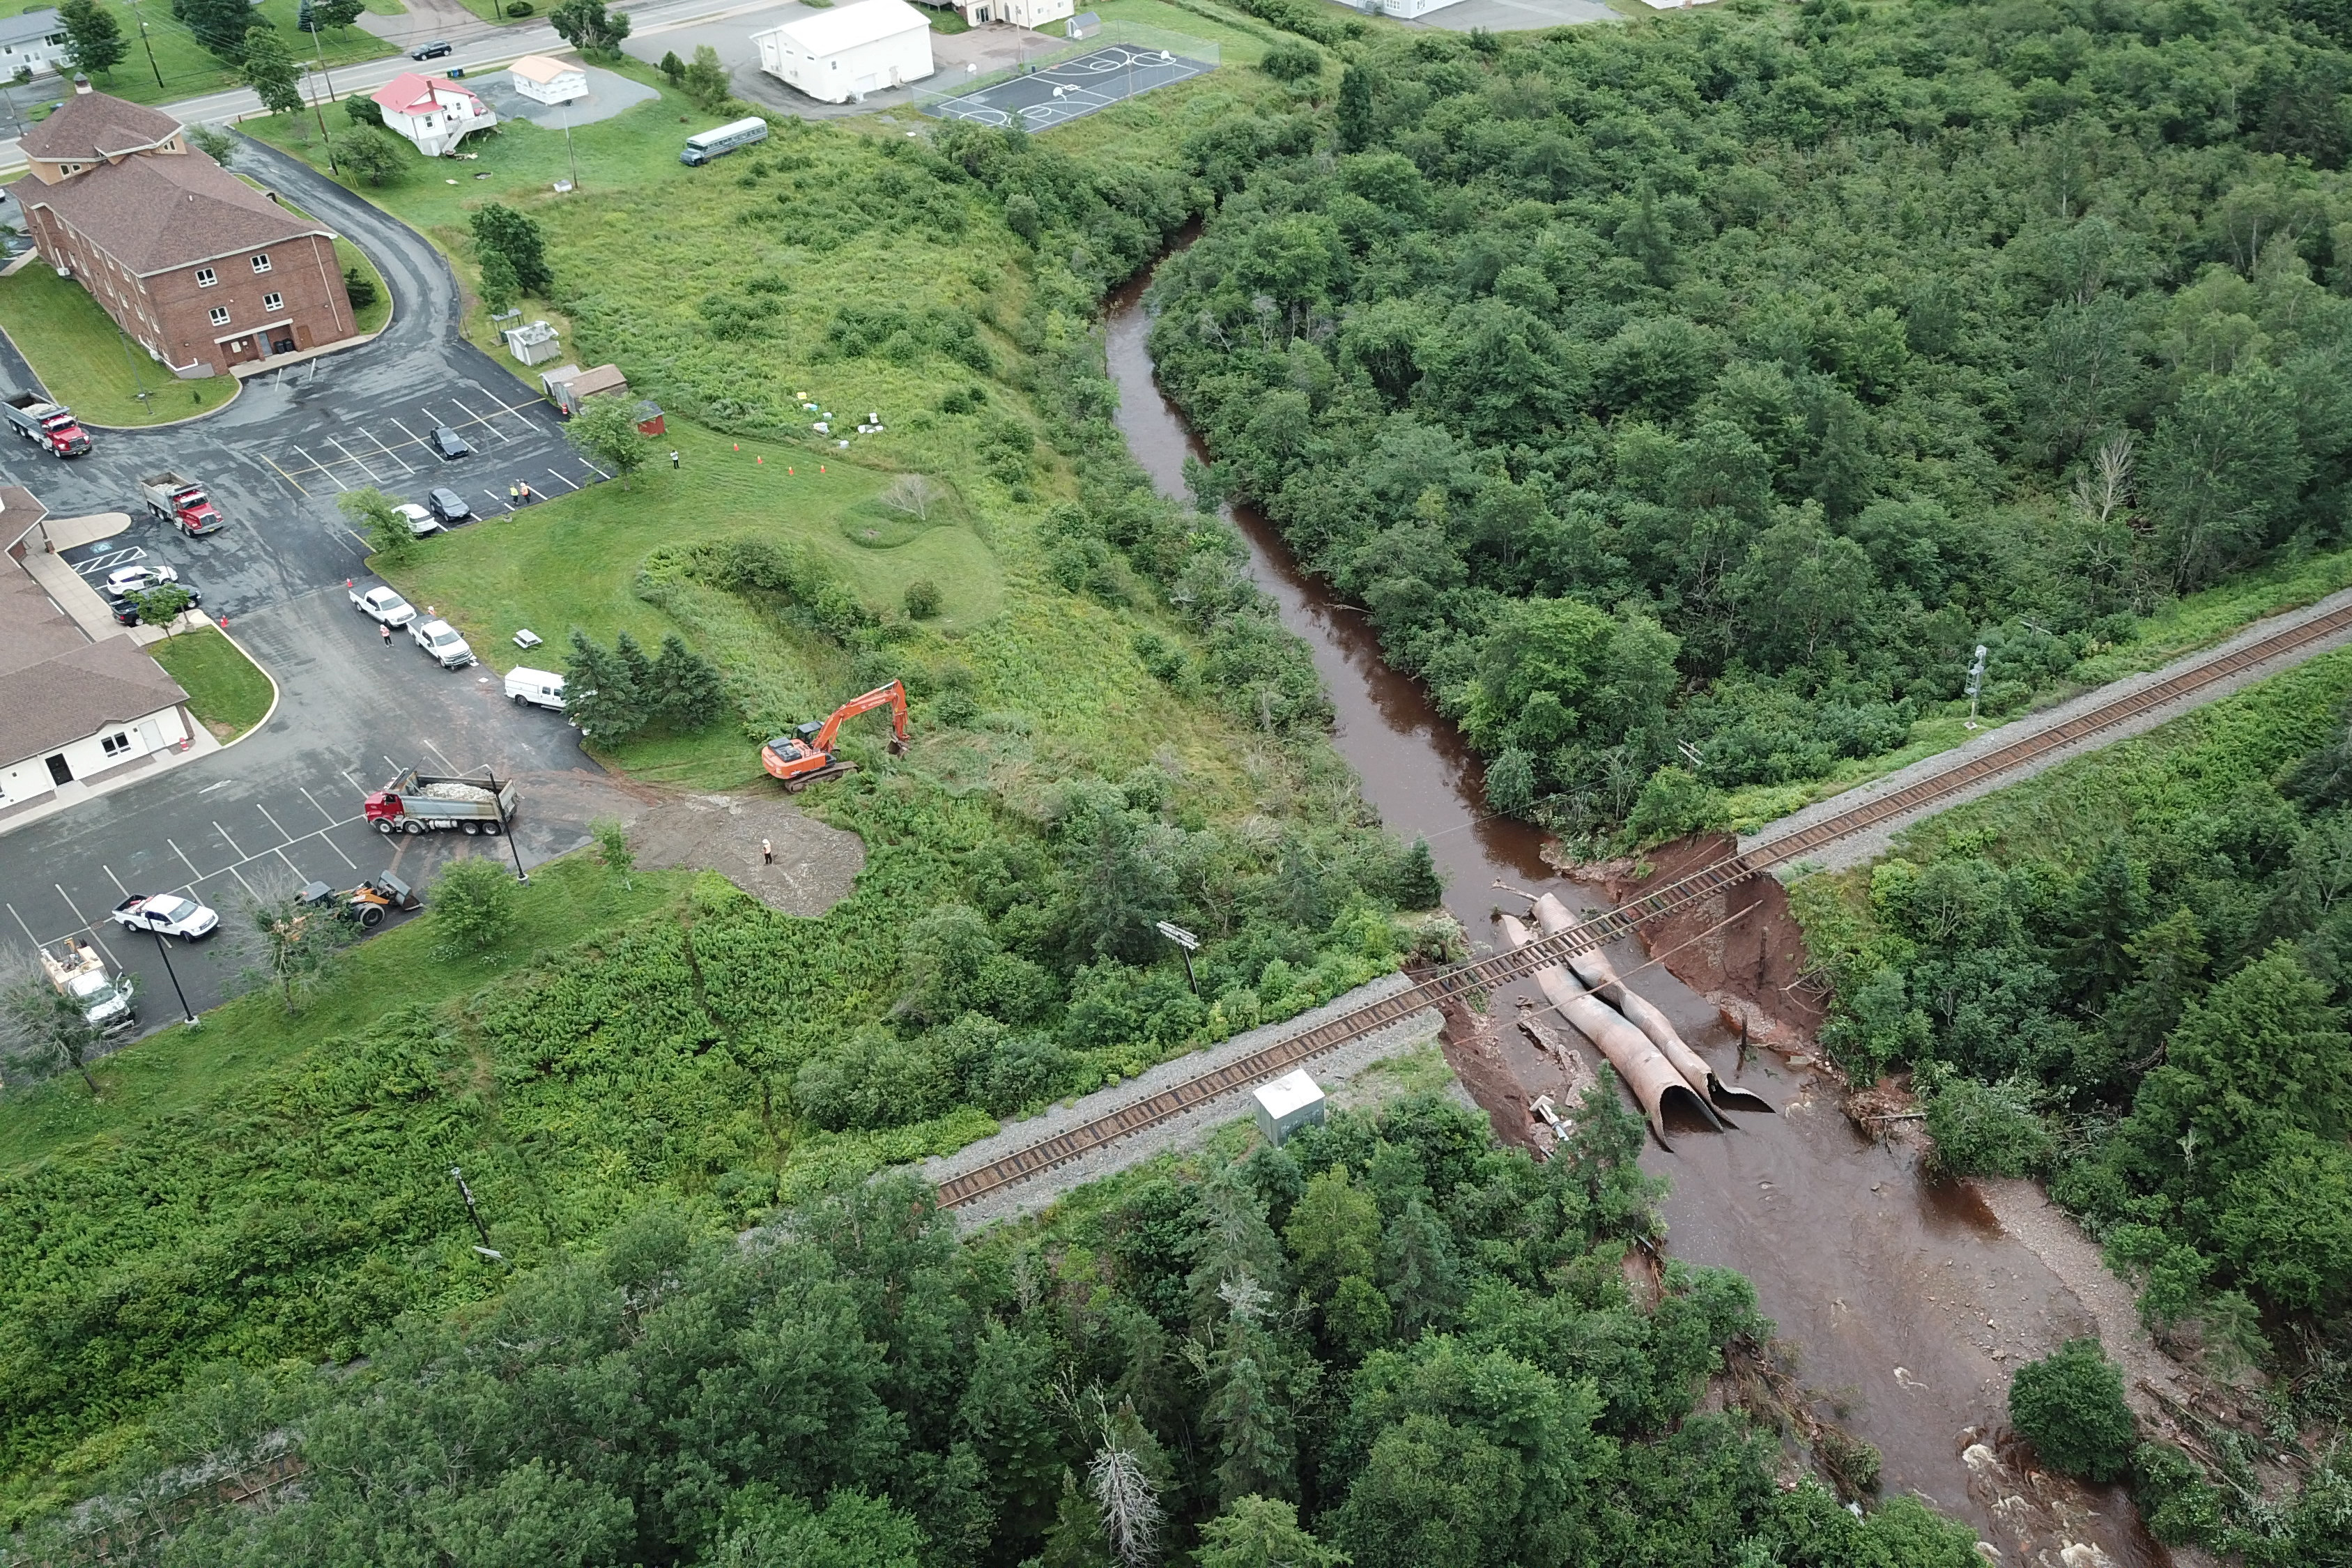 Water flows through a washed-out culvert on the main CN Rail line in Truro